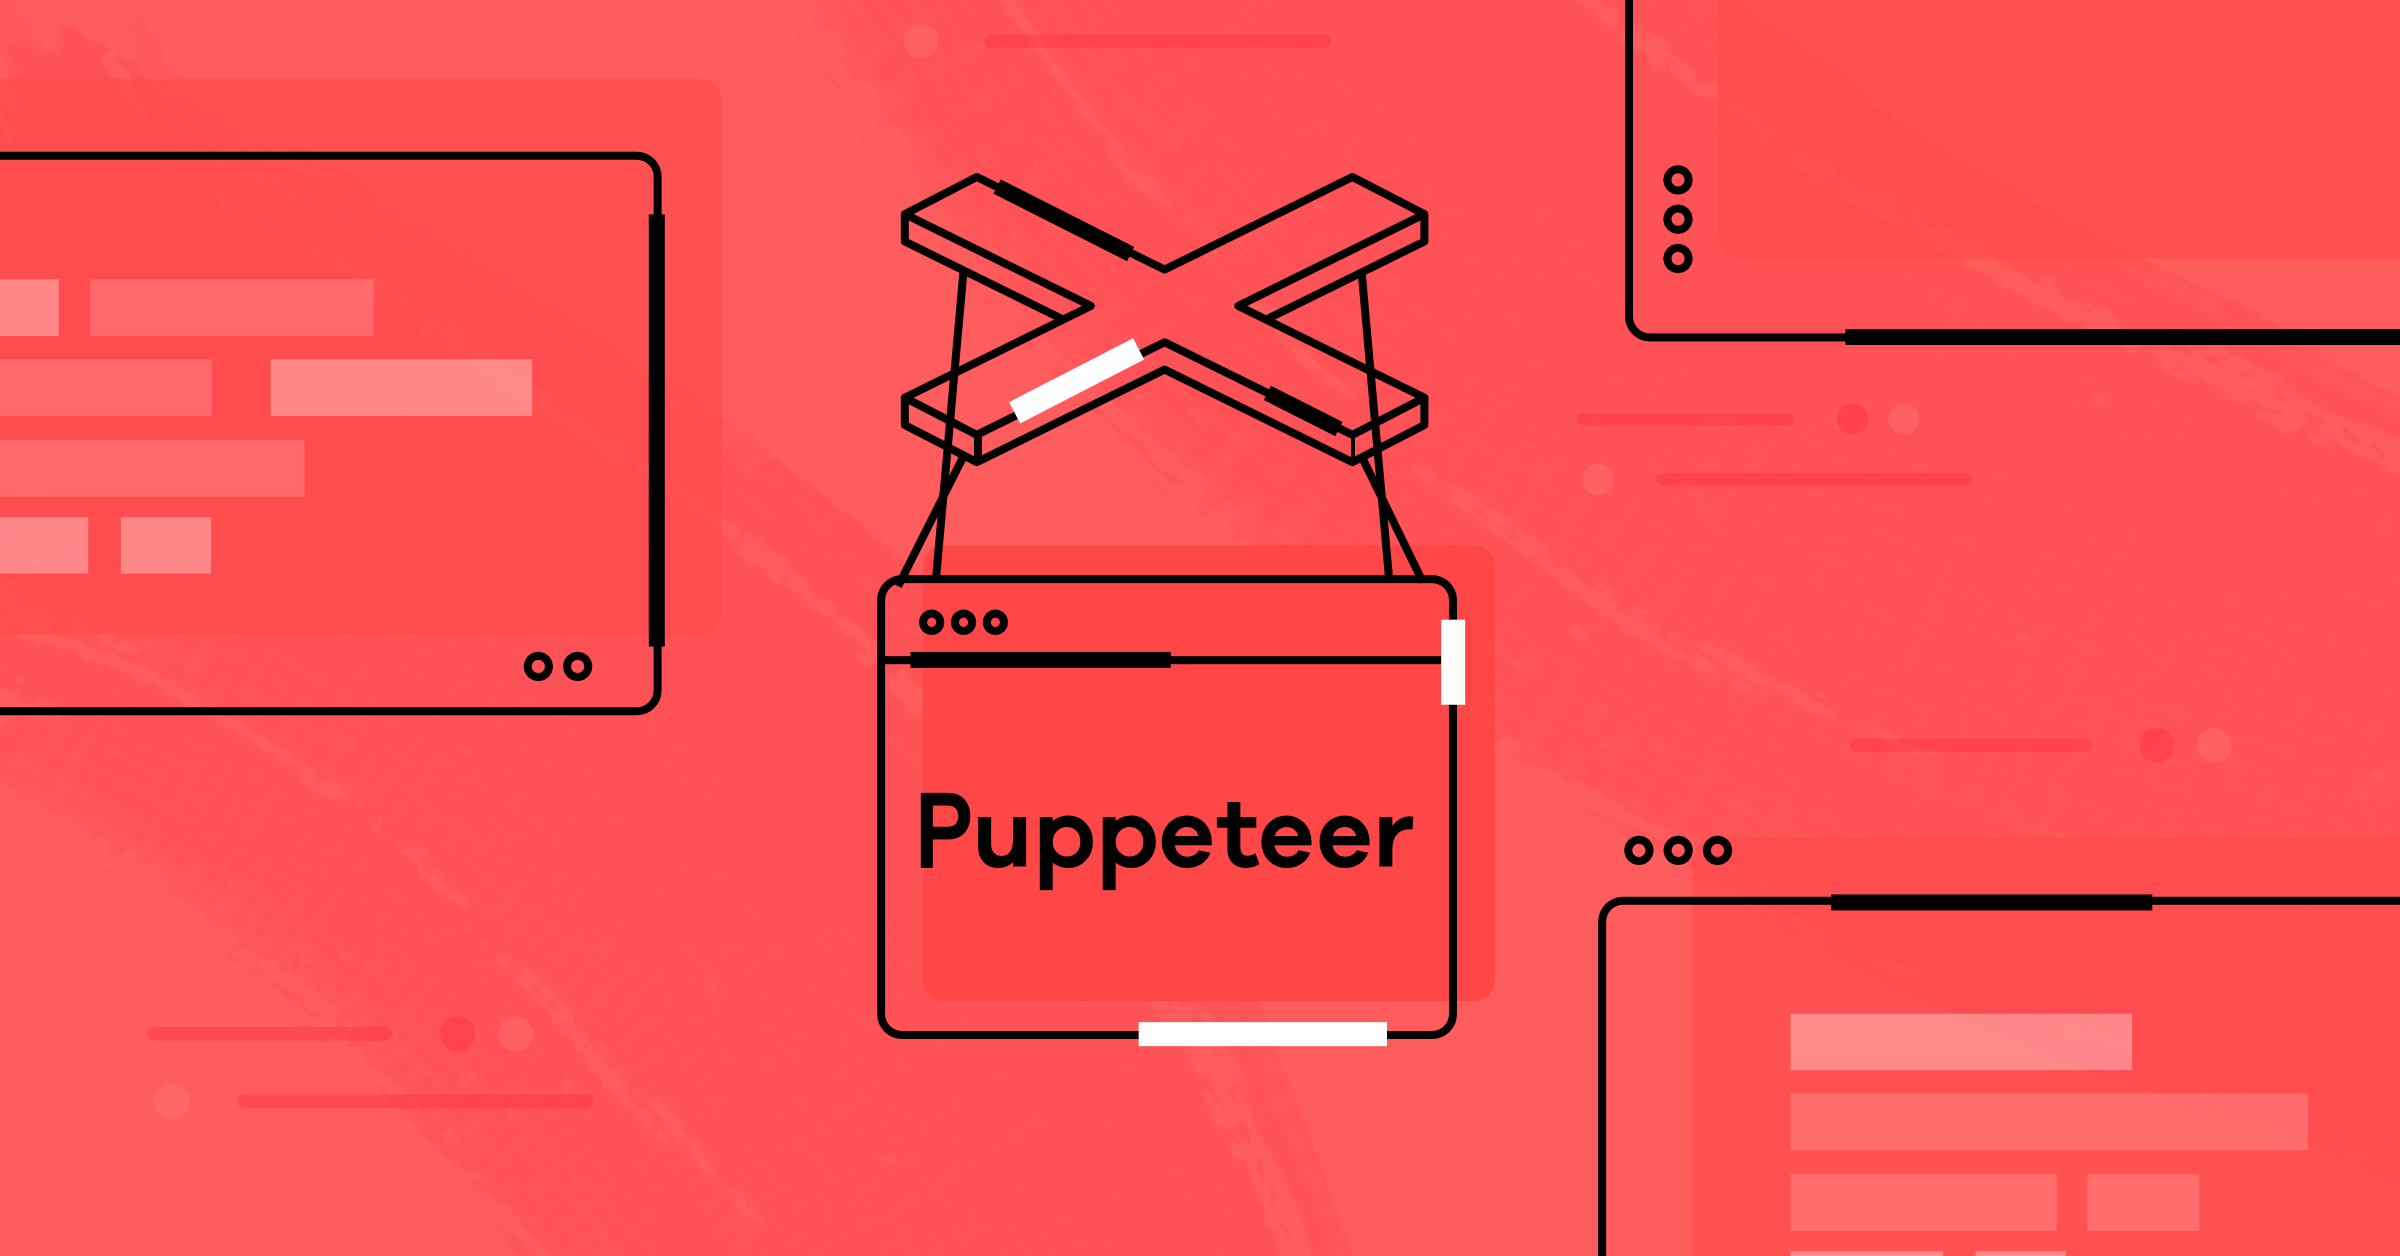 How to create your own Puppeteer-as-a-service using NodeJS and Puppeteer?